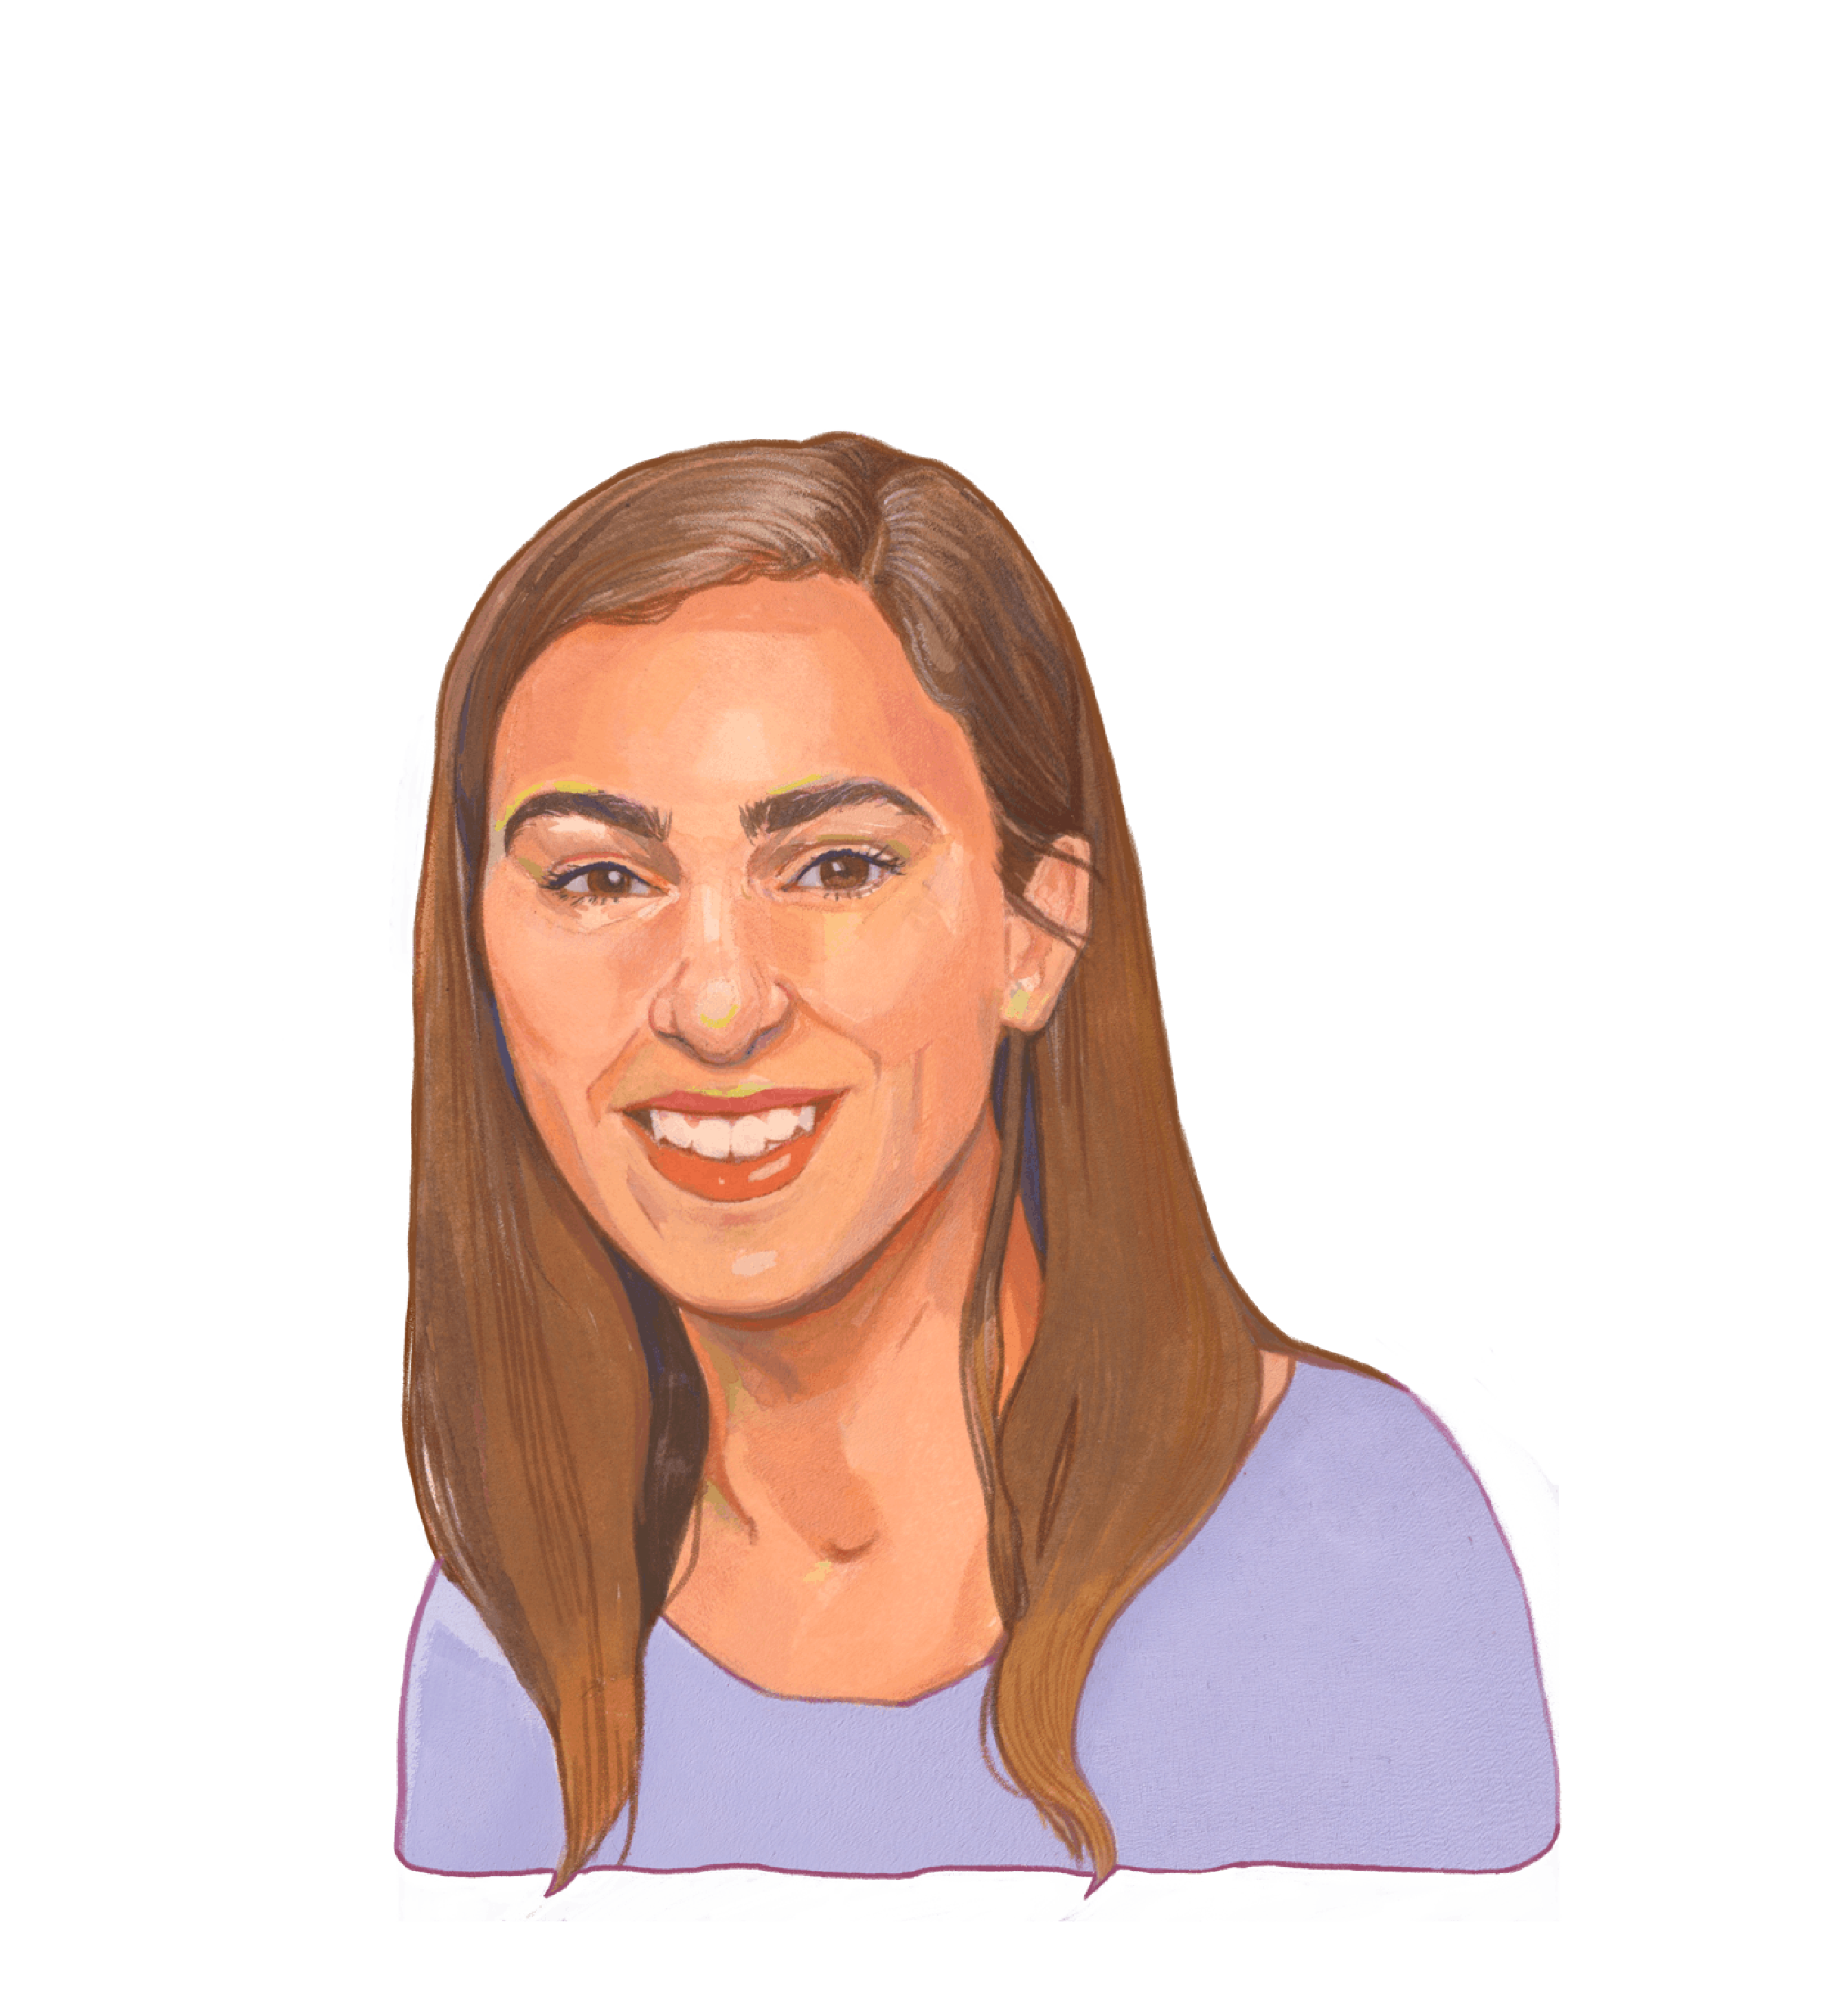 Color illustration of Alisabeth Marstellar, a person with a light skin tone wearing a lilac shirt. They have long brown hair and a bright smile on their face.